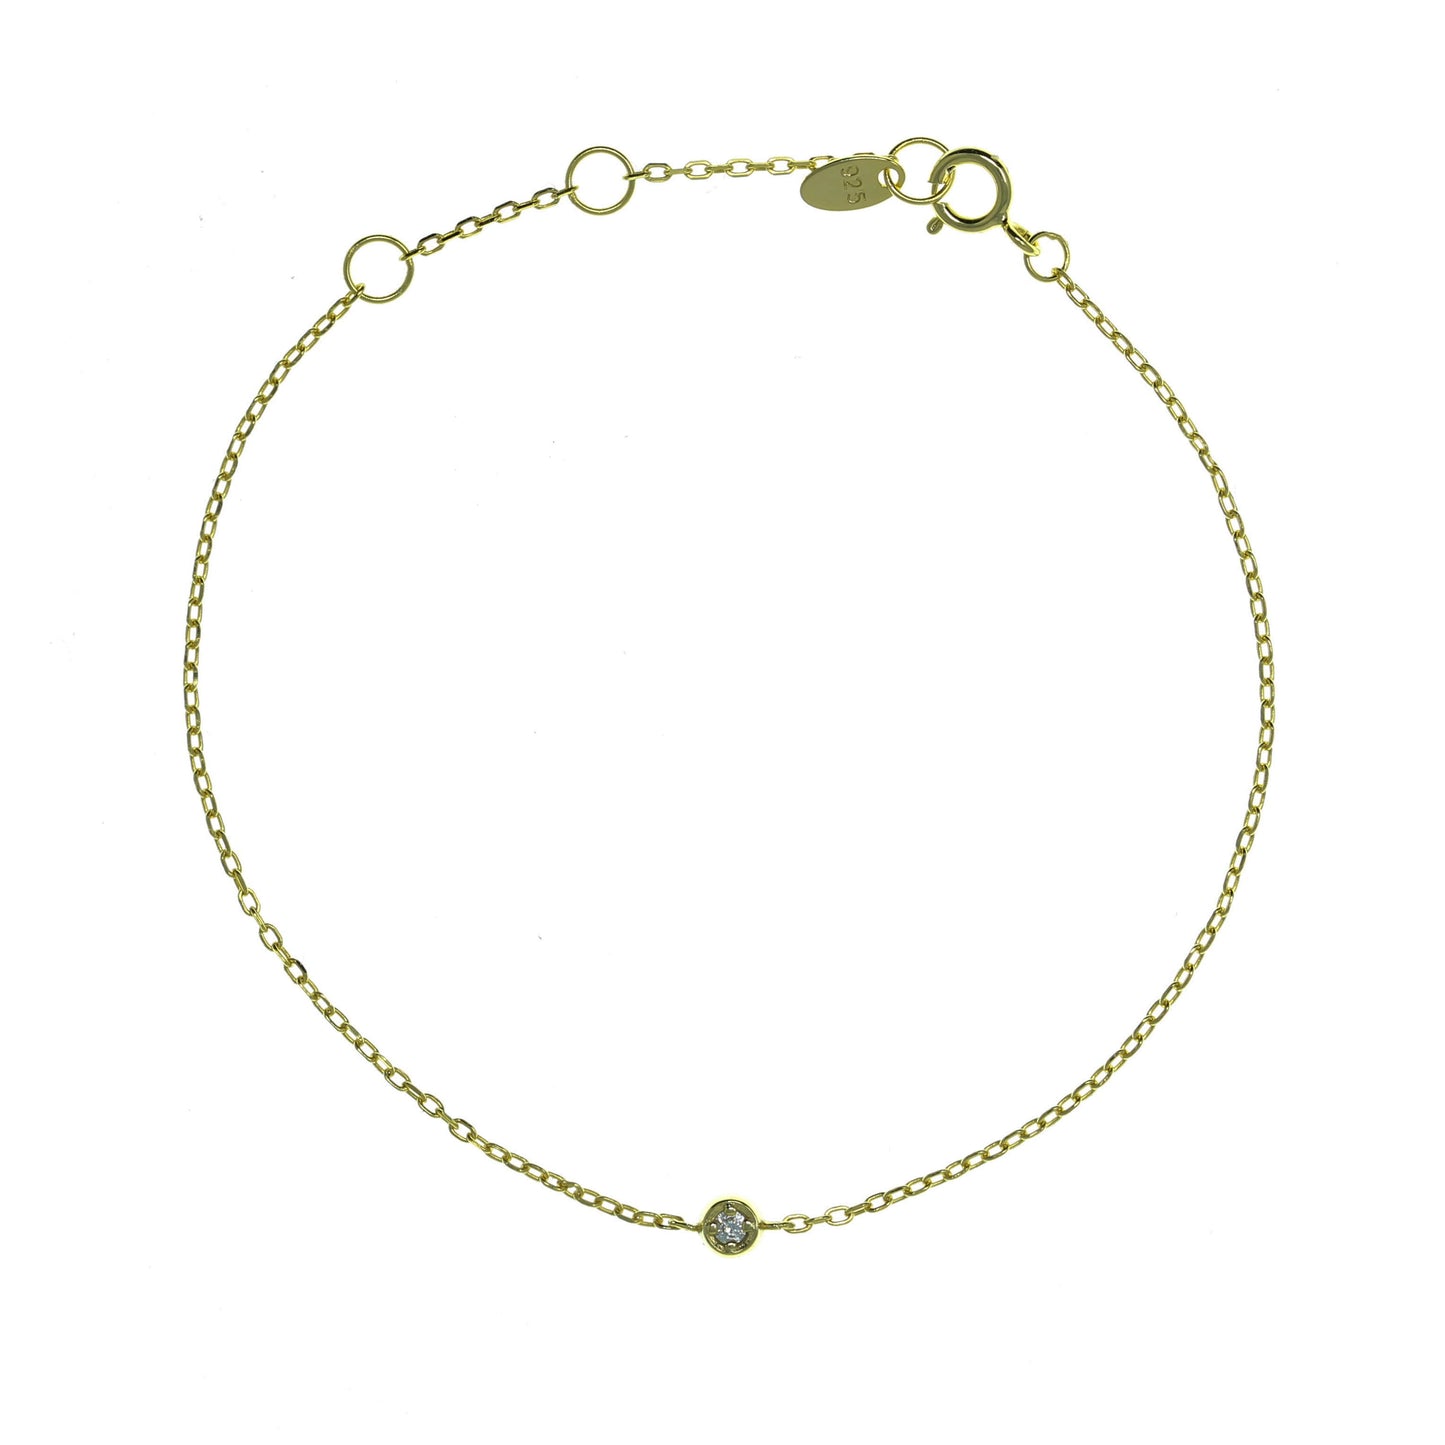 BG-8/G - Delicate Chain Bracelet with a Single Small Cubic Zirconia